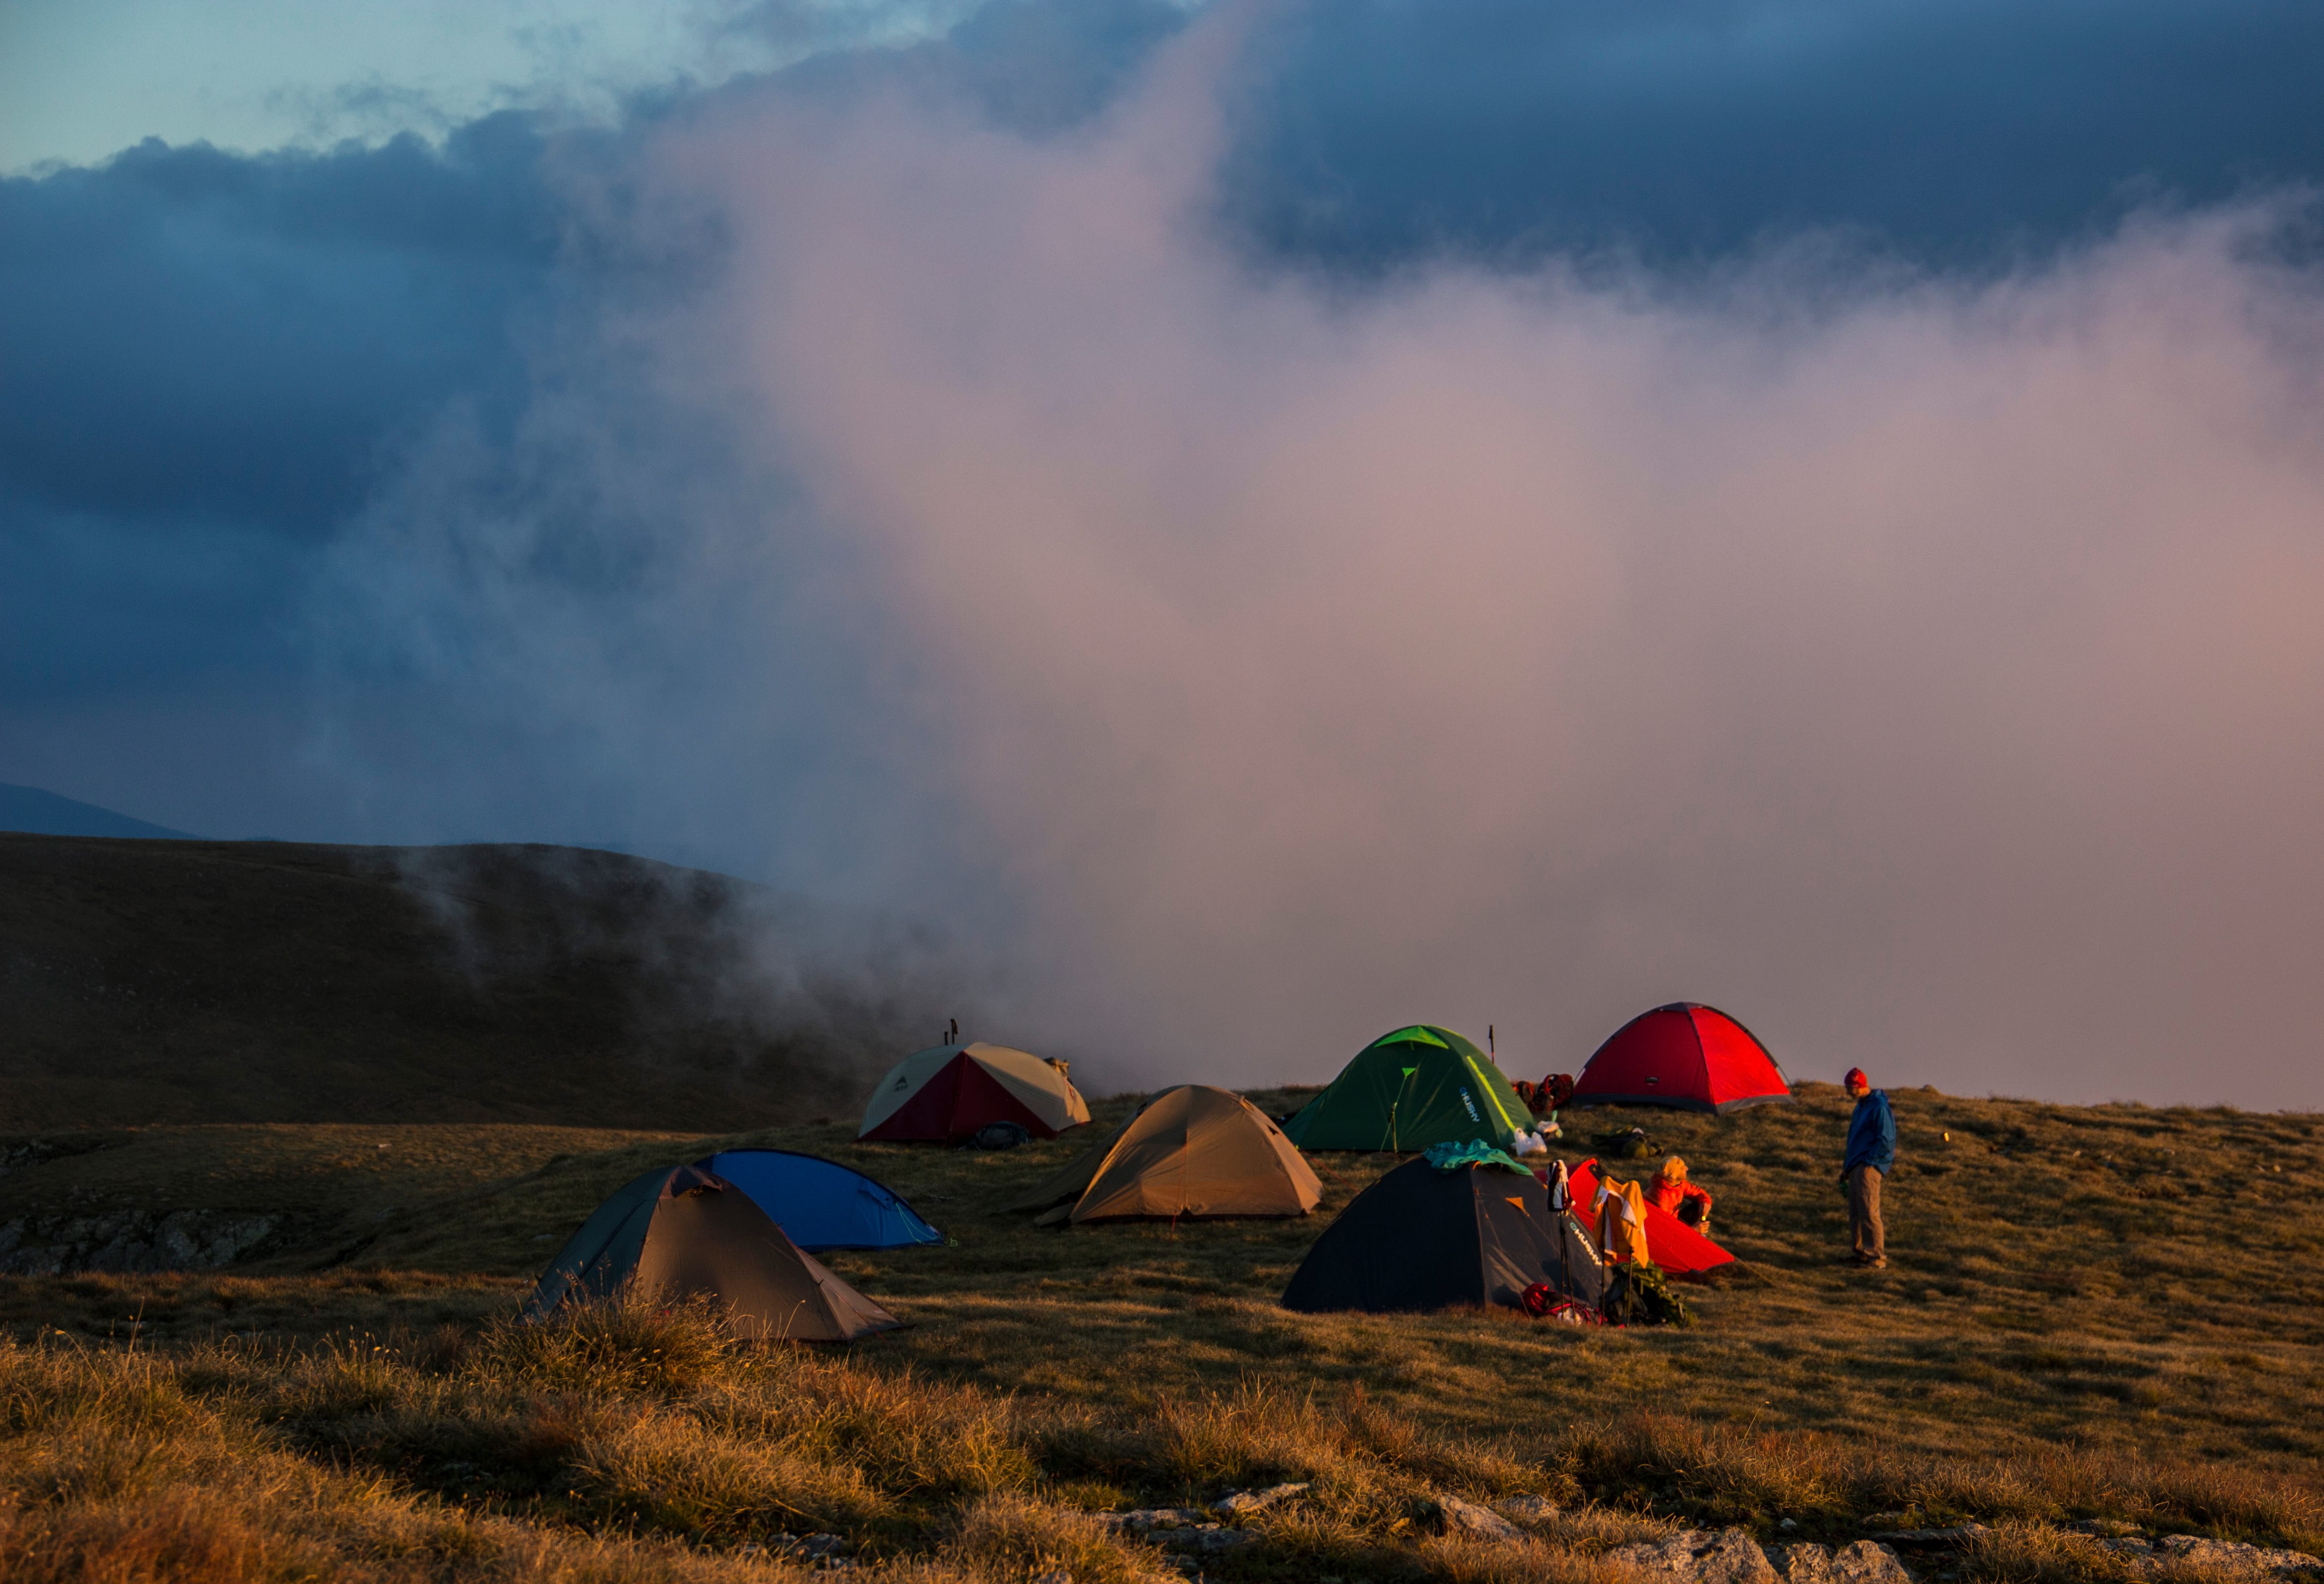 camping at high altitudes near the clouds